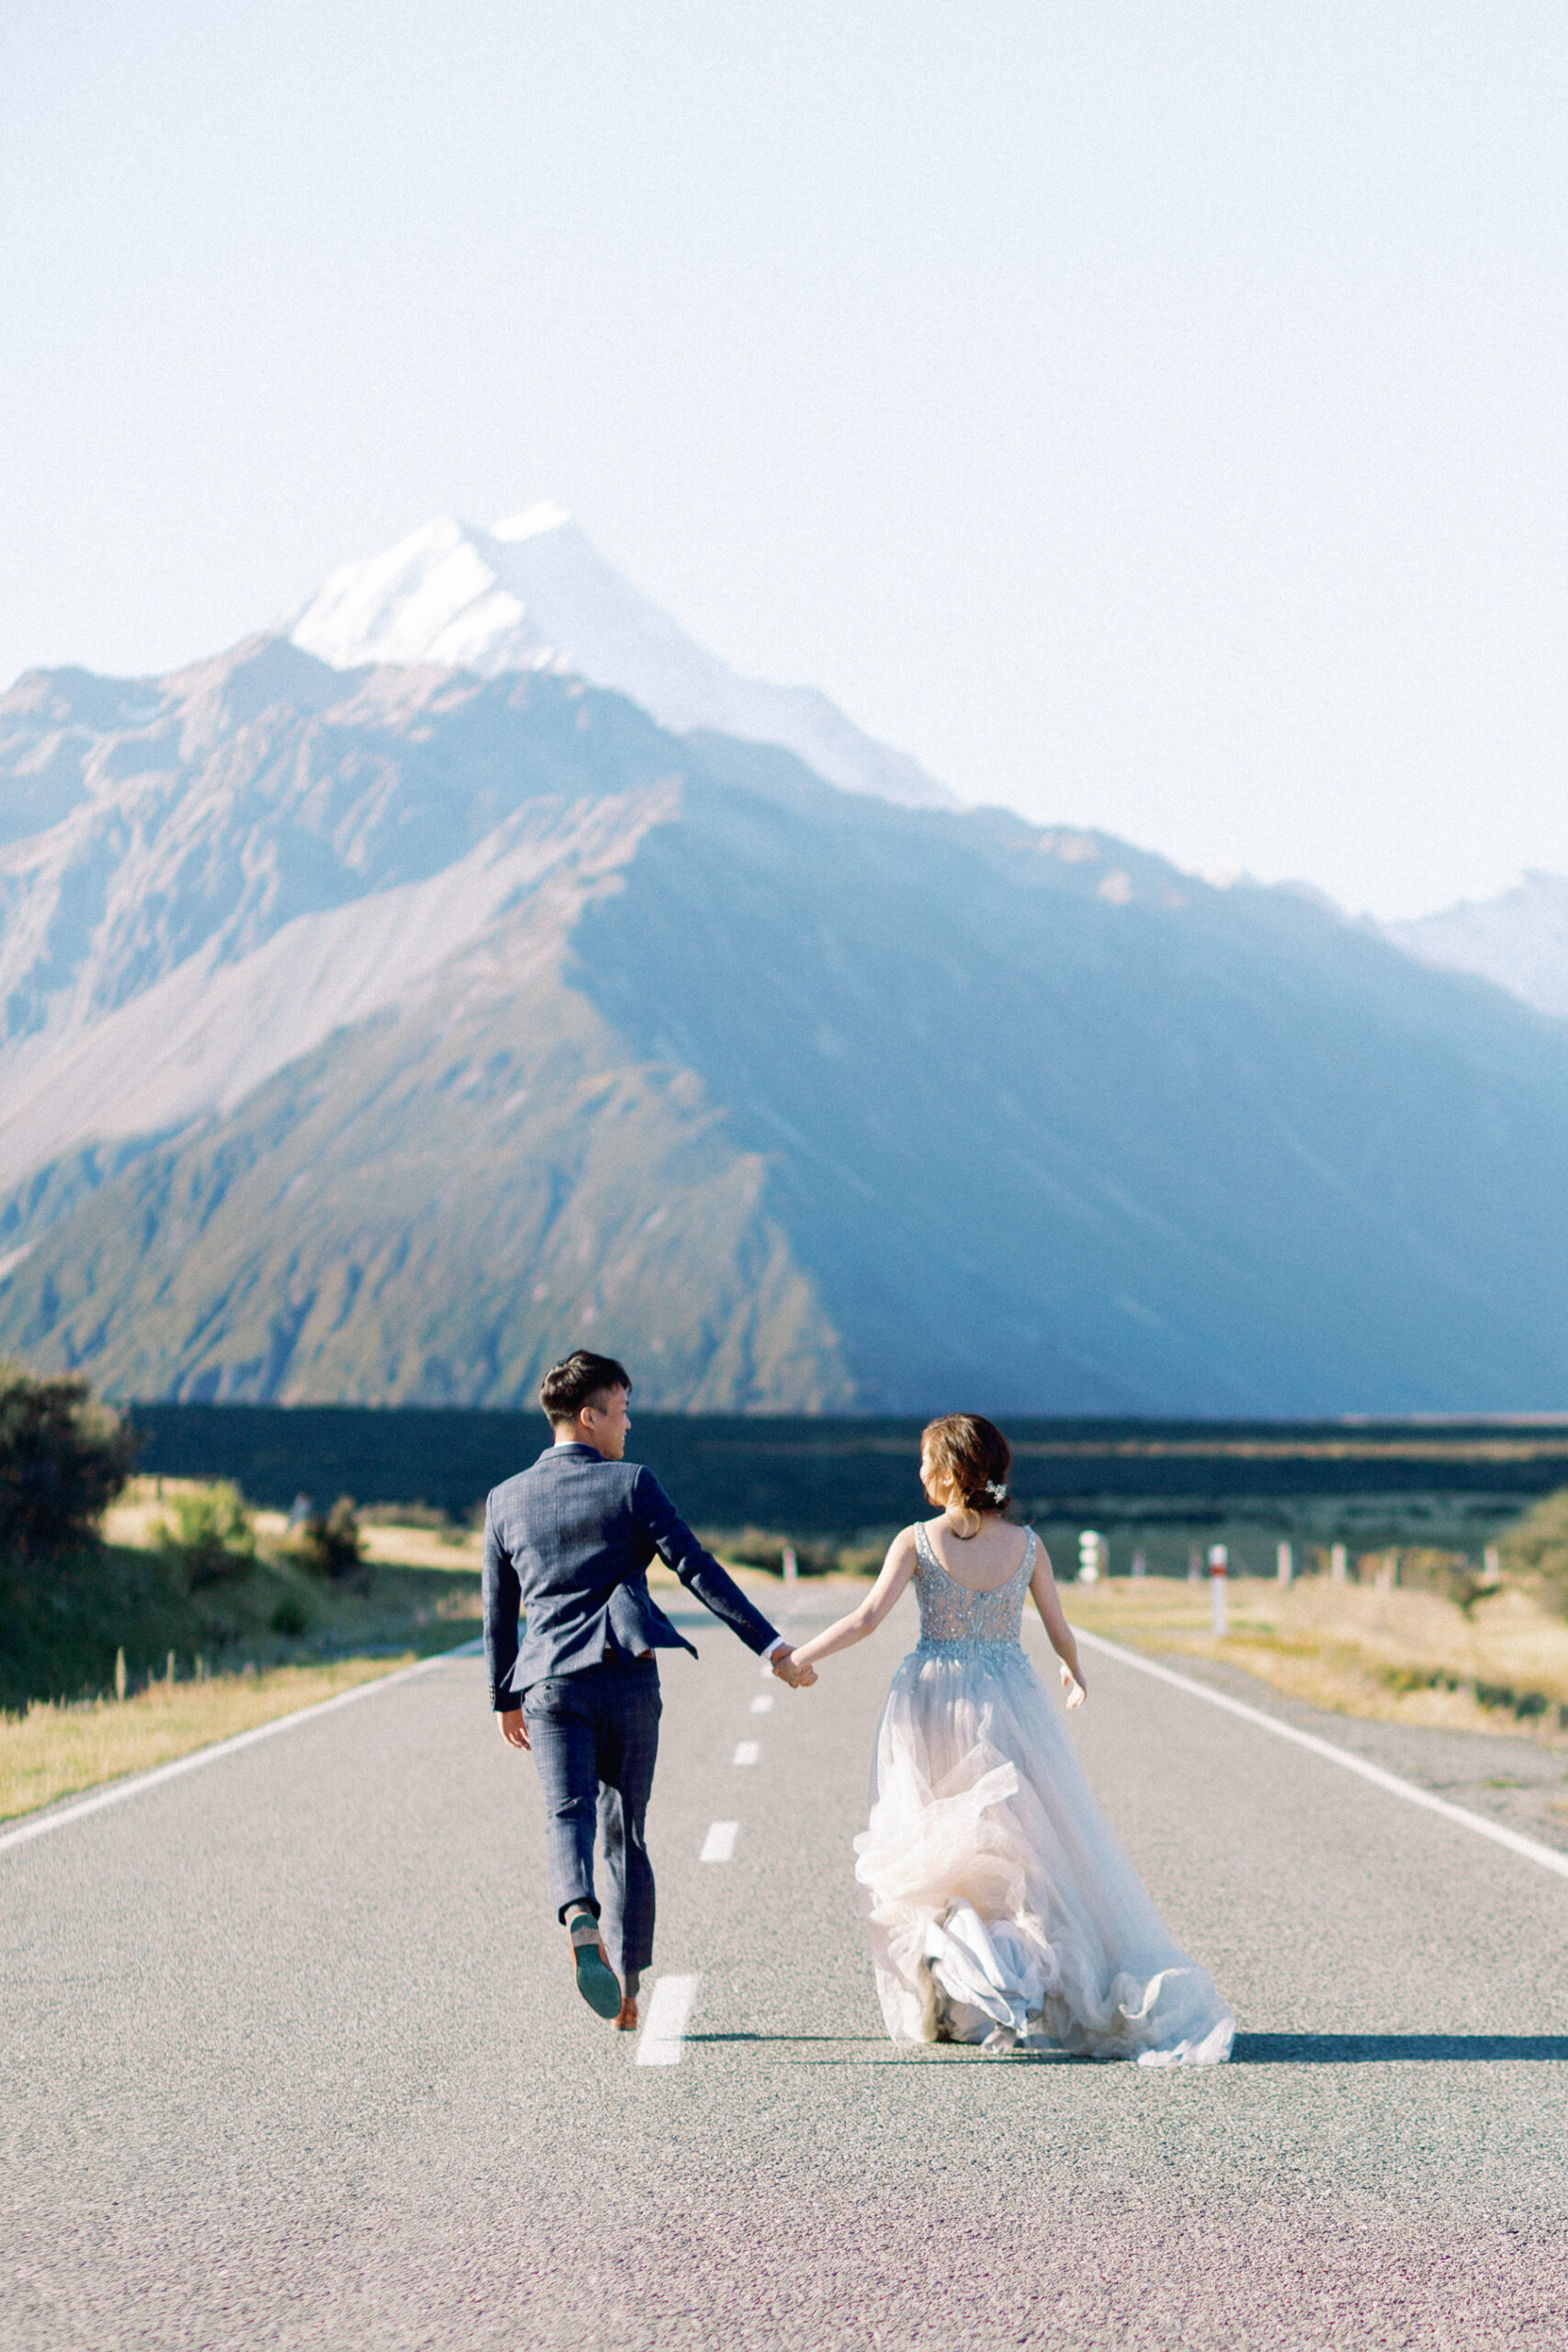 Destination pre-wedding featuring the stunning landscapes of New Zealand